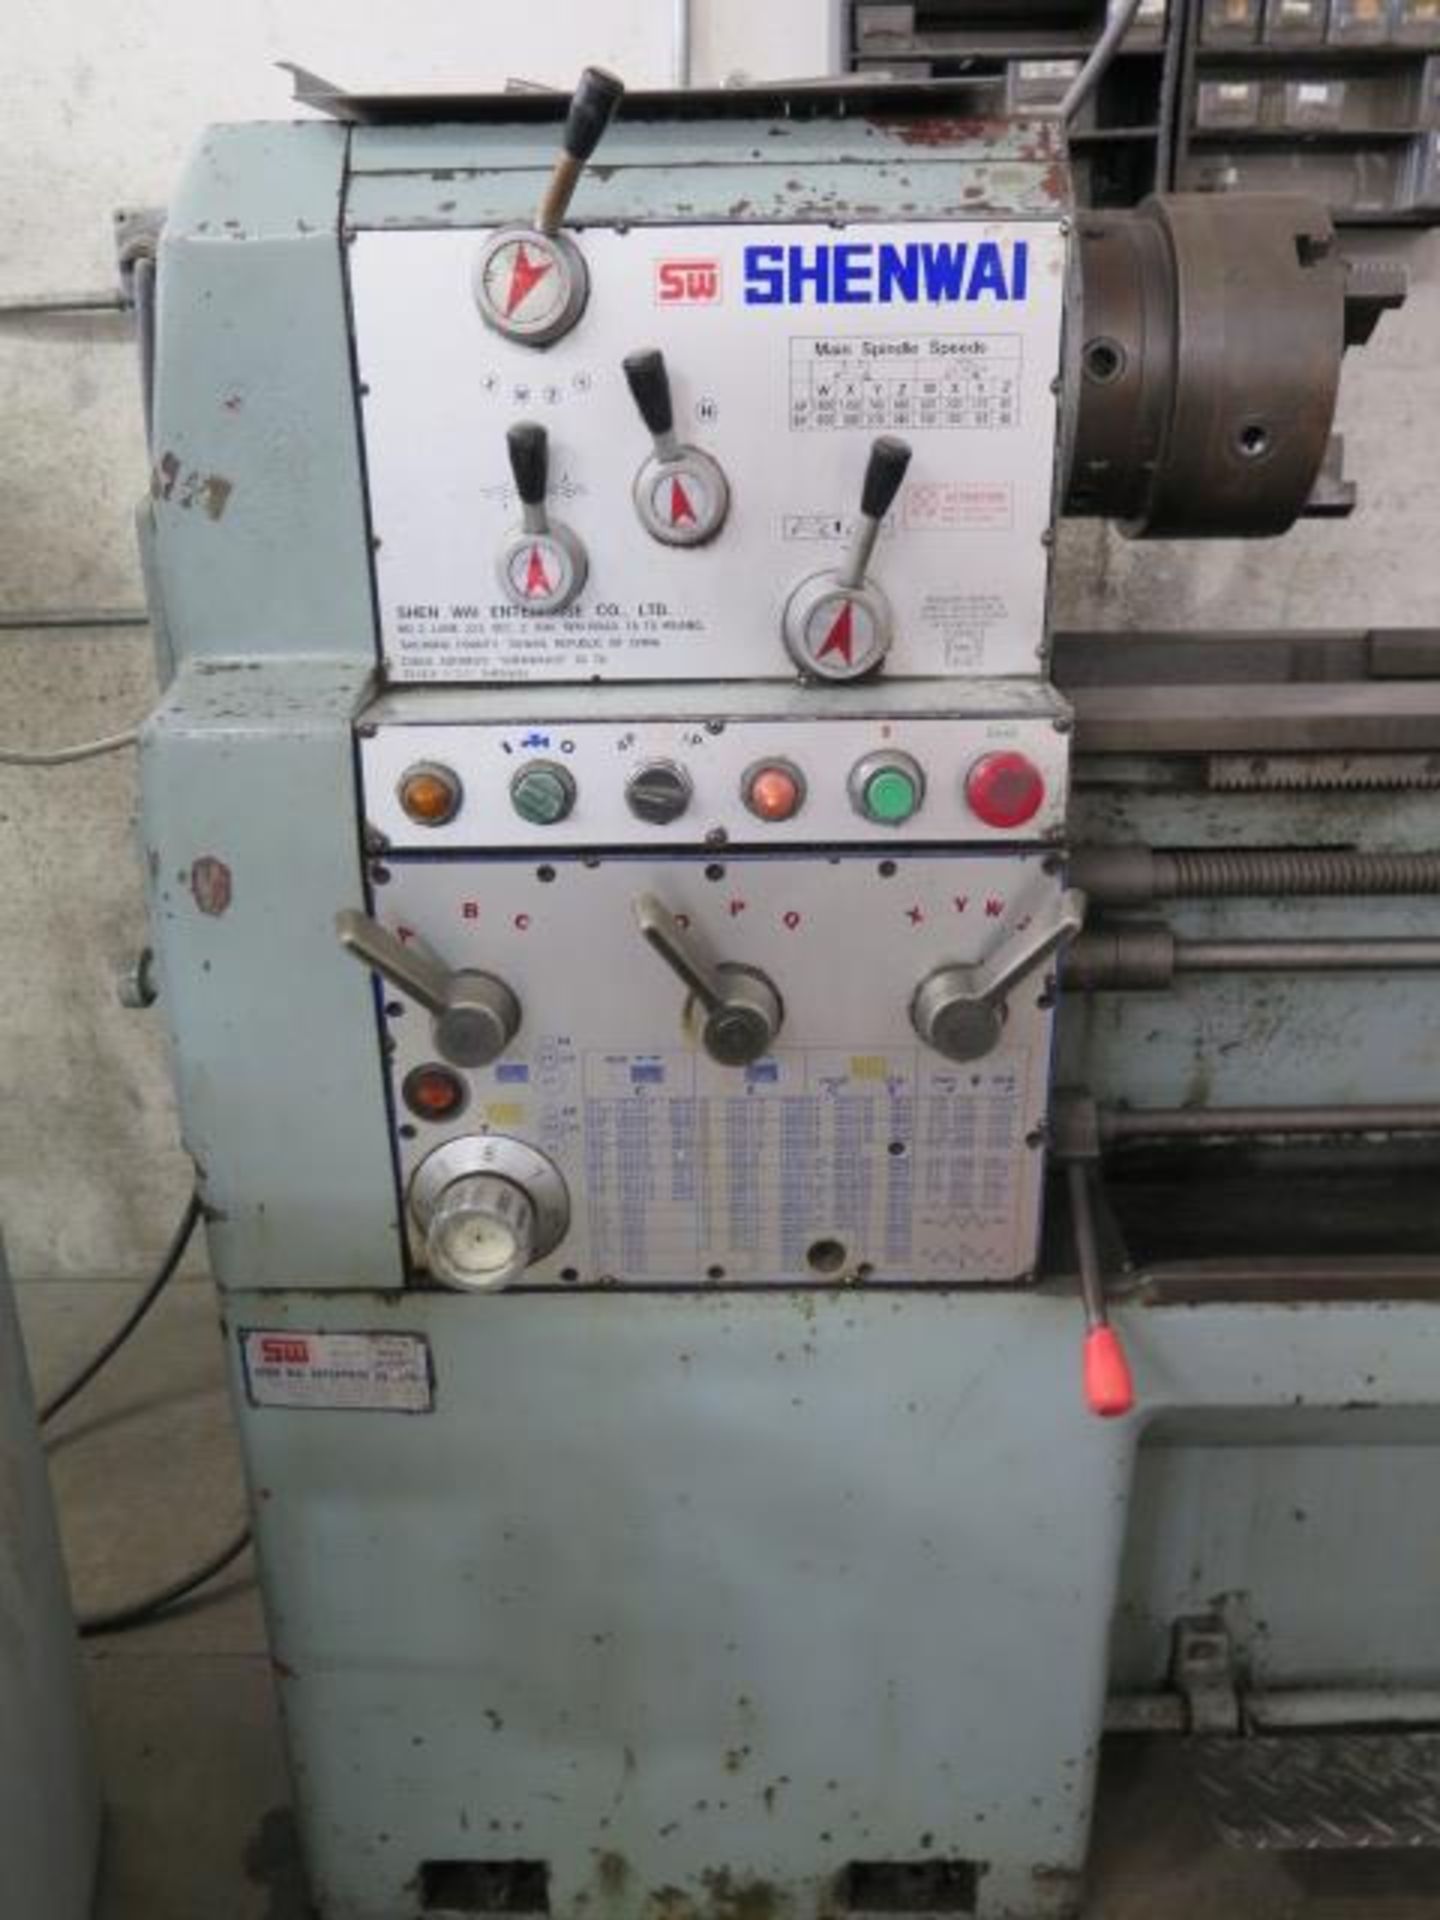 SW Shenwai “Chieftain” 15” x 40” Geared Head Gap Lathe s/n 10449 w/ 40-1800 RPM, Inch/mm, SOLD AS IS - Image 3 of 12